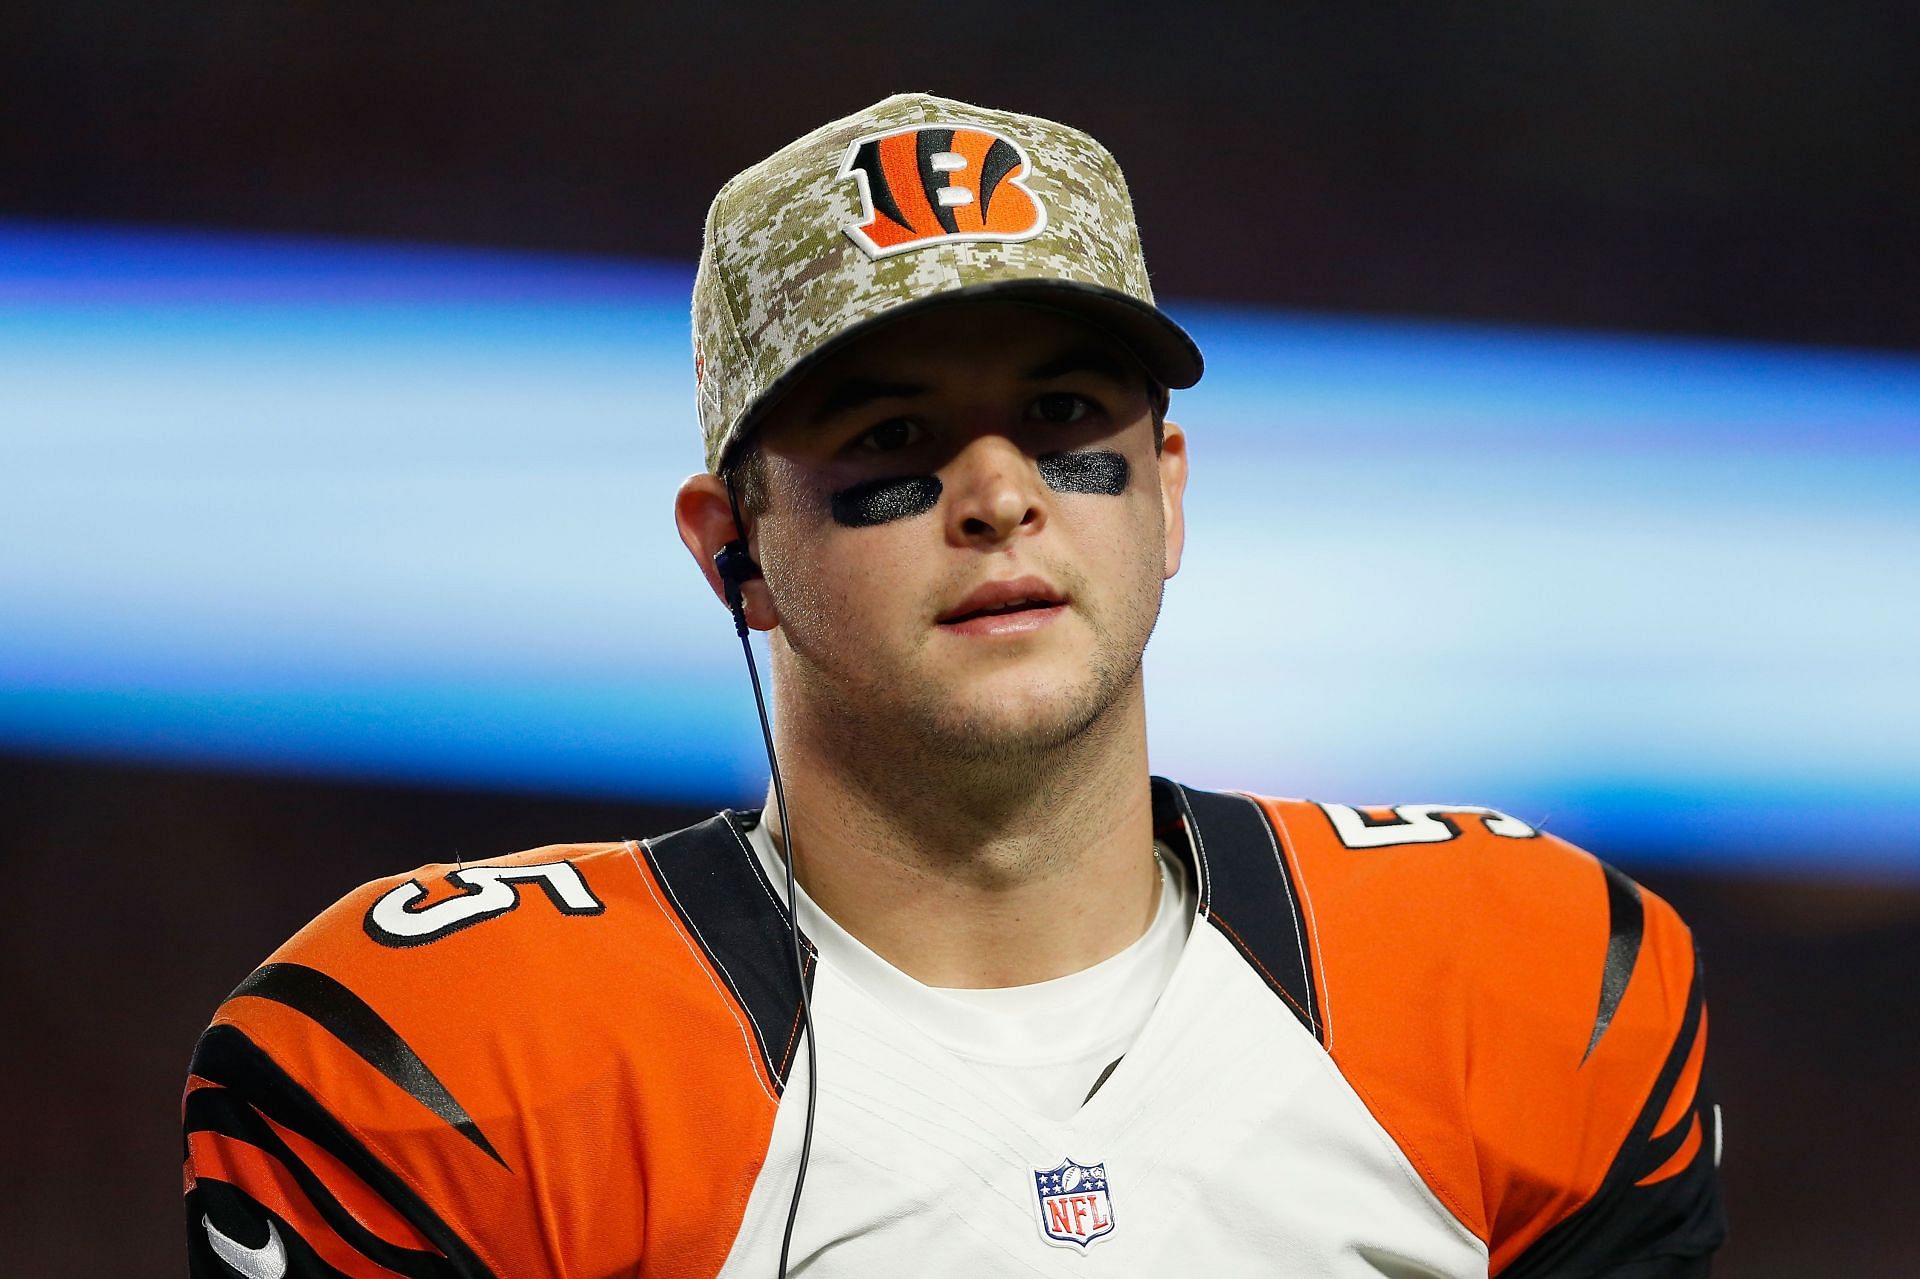 AJ McCarron was primarily a backup in the NFL.